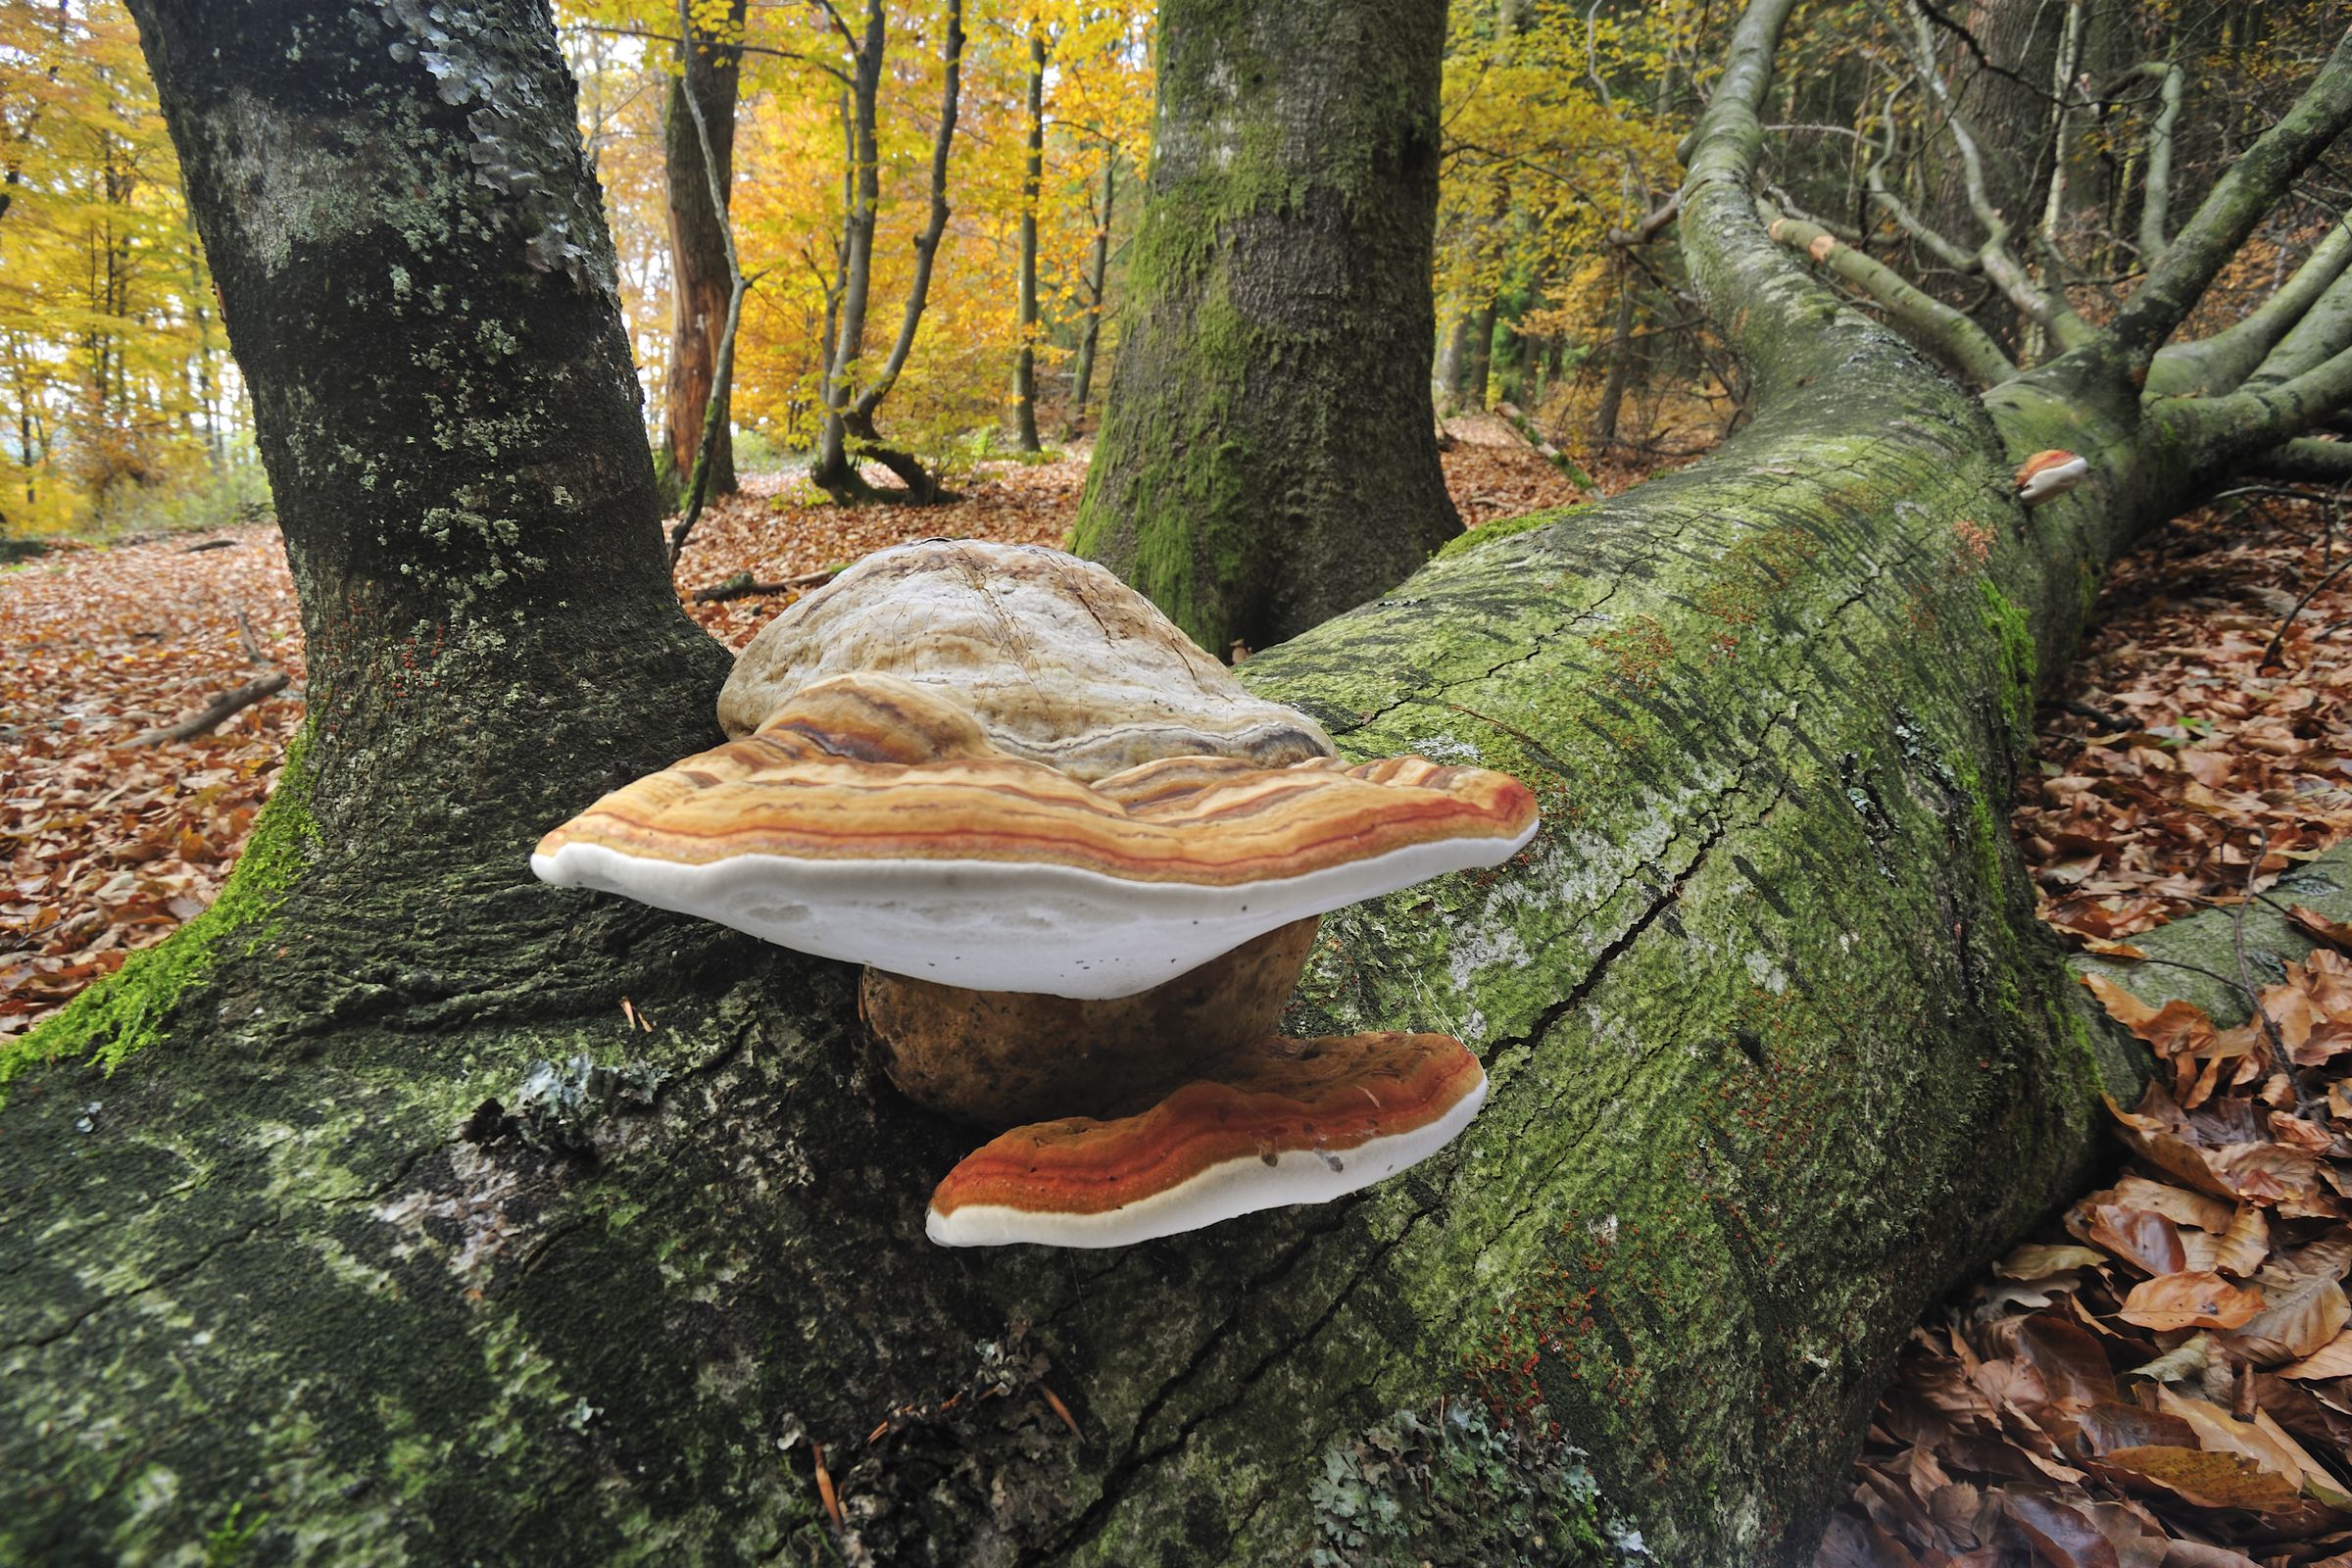 A large mushroom protrudes from a mossy fallen tree trunk on a forest floor covered with autumn leaves